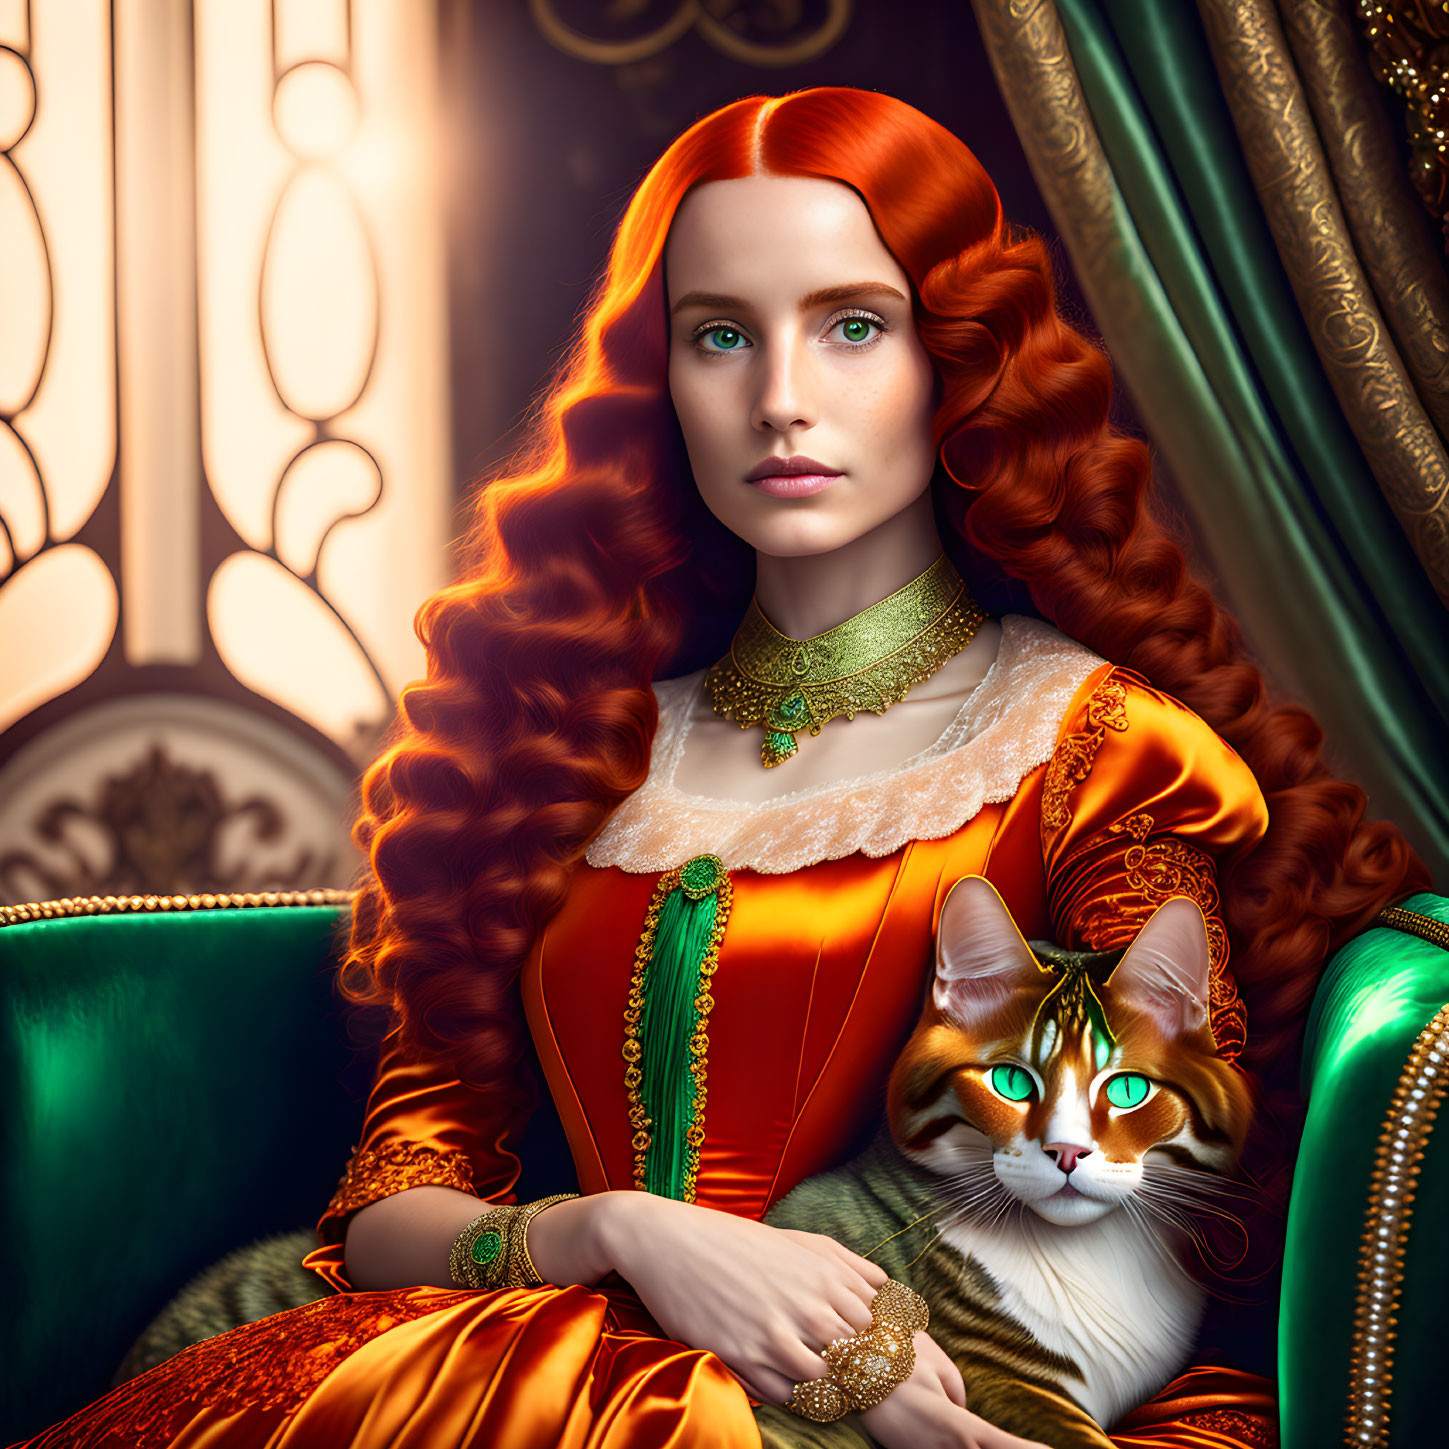 Red-haired woman in Renaissance orange dress with cat on lap, sitting elegantly in ornate setting